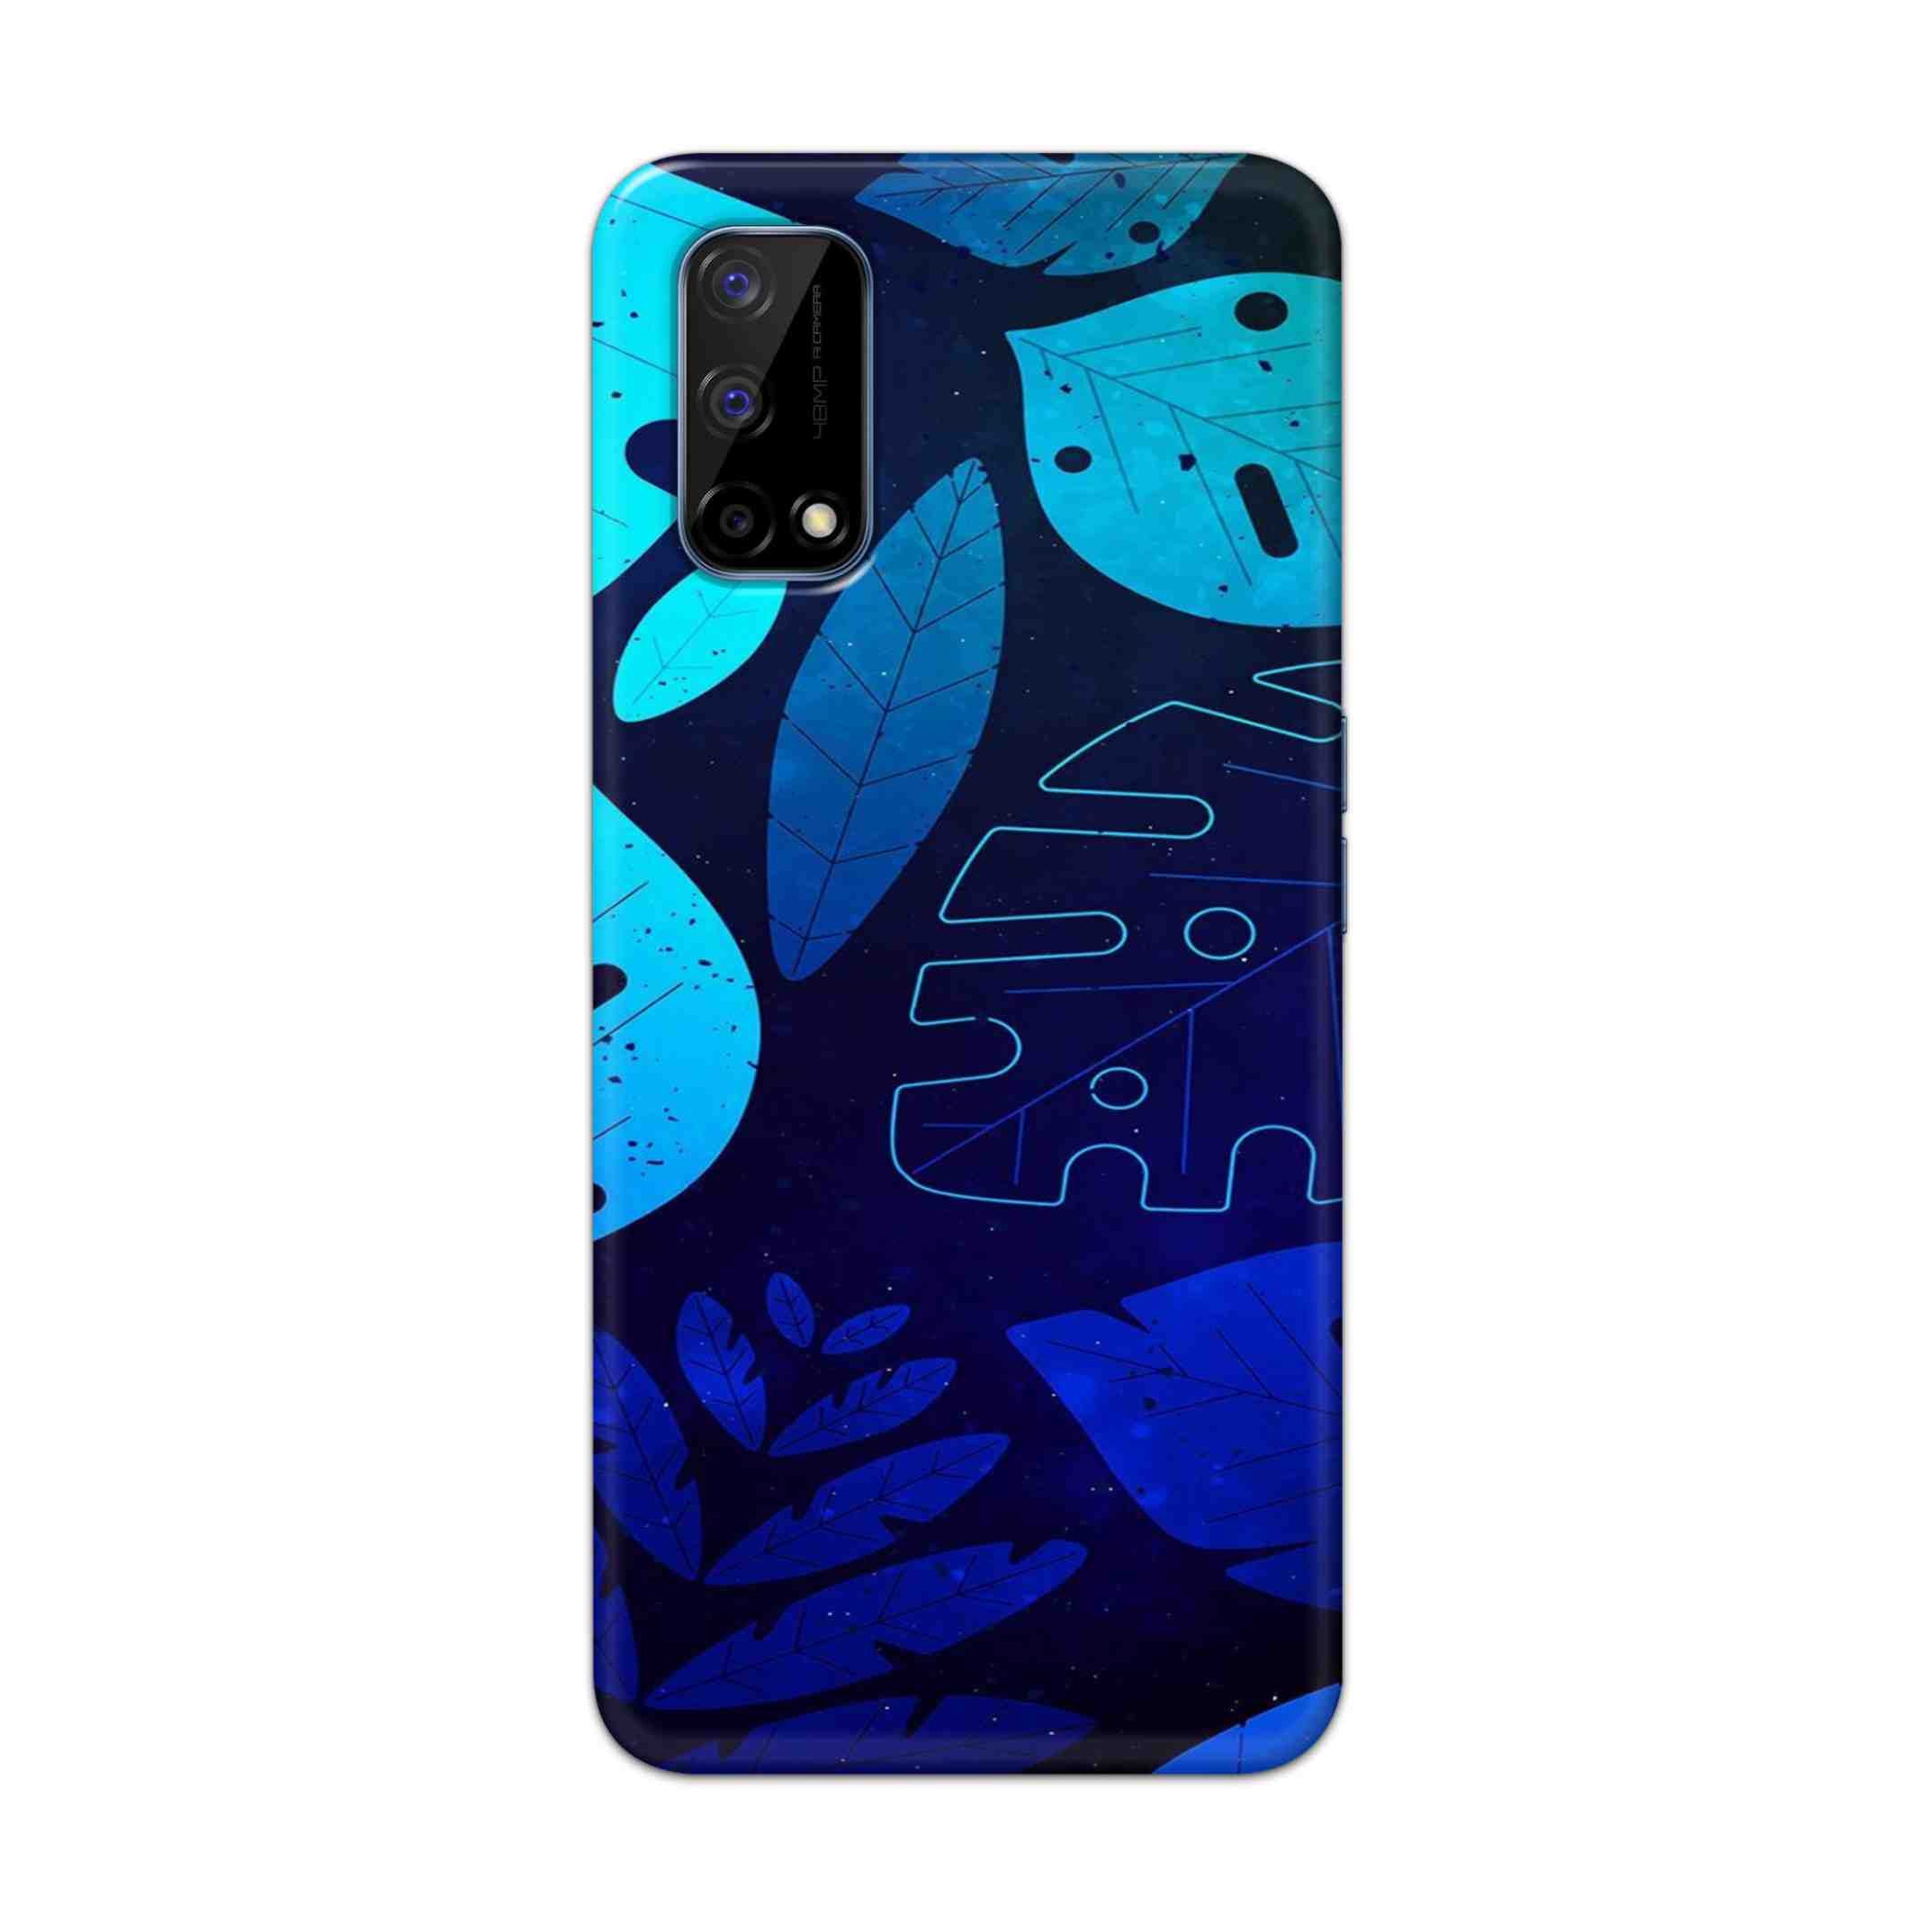 Buy Neon Leaf Hard Back Mobile Phone Case Cover For Realme Narzo 30 Pro Online